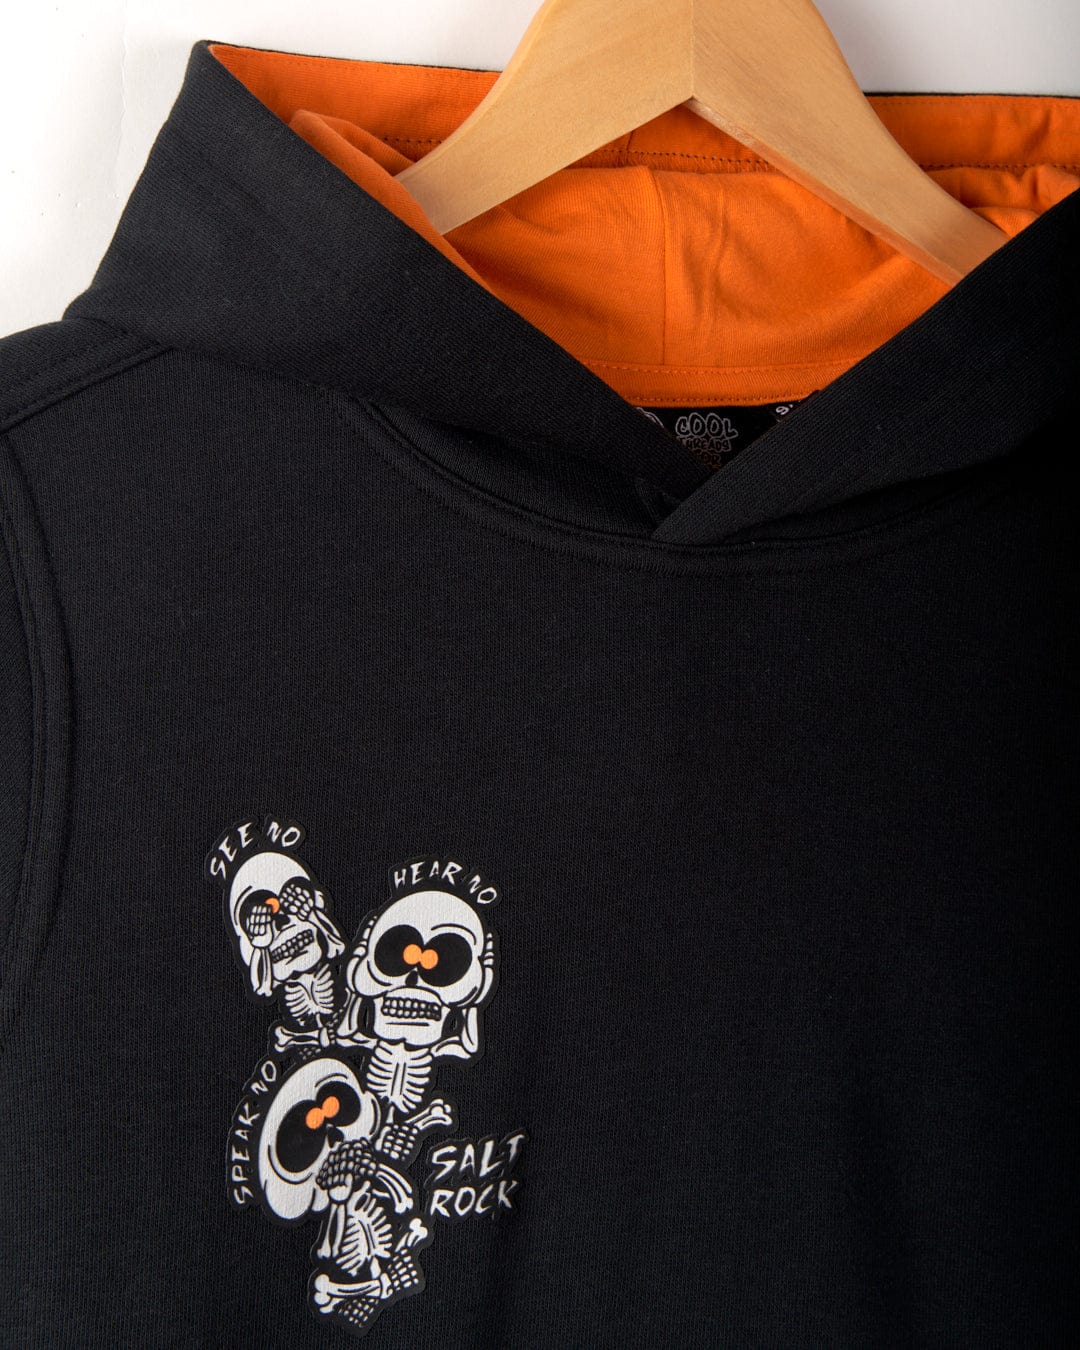 A black hoodie with an orange inner lining displayed on a wooden hanger. It features three skeleton illustrations and text that reads "SPEAK NO, HEAR NO, SEE NO," along with distinctive Saltrock branding. The design includes a convenient kangaroo pocket for added functionality. Known as the See No Skulls - Kids Recycled Pop Hoodie - Black by Saltrock, this product offers both style and practicality.